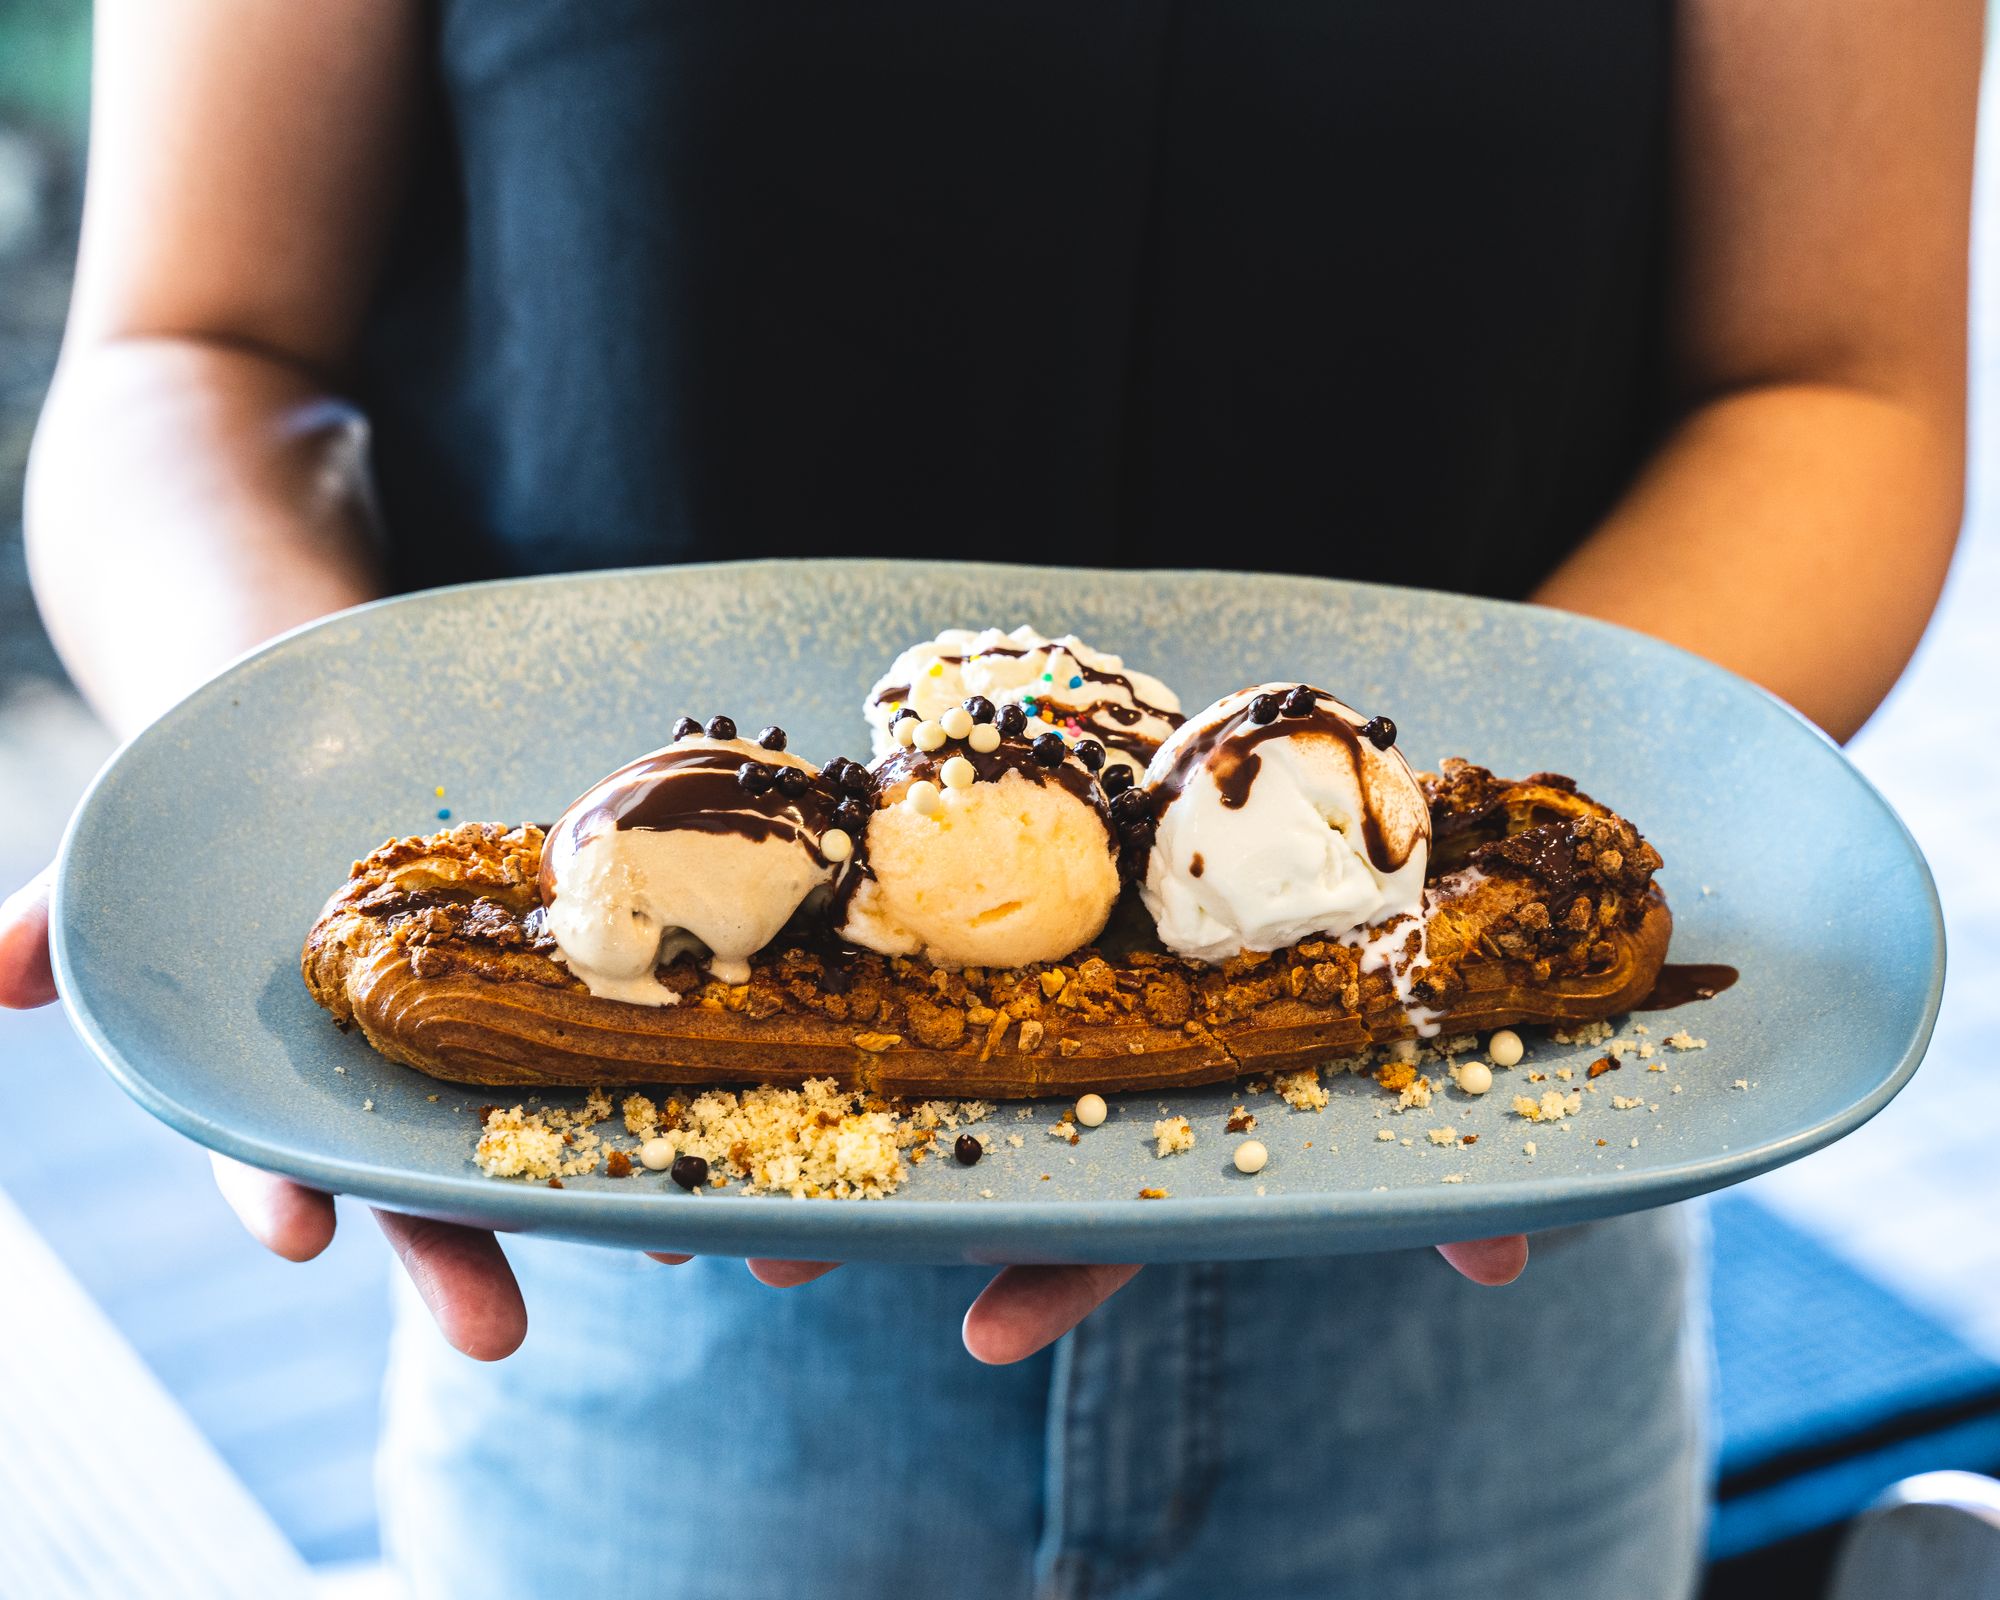 An eclair looking pastry with three scoops of ice cream with spinkles and chocolate sauce, held on a plate